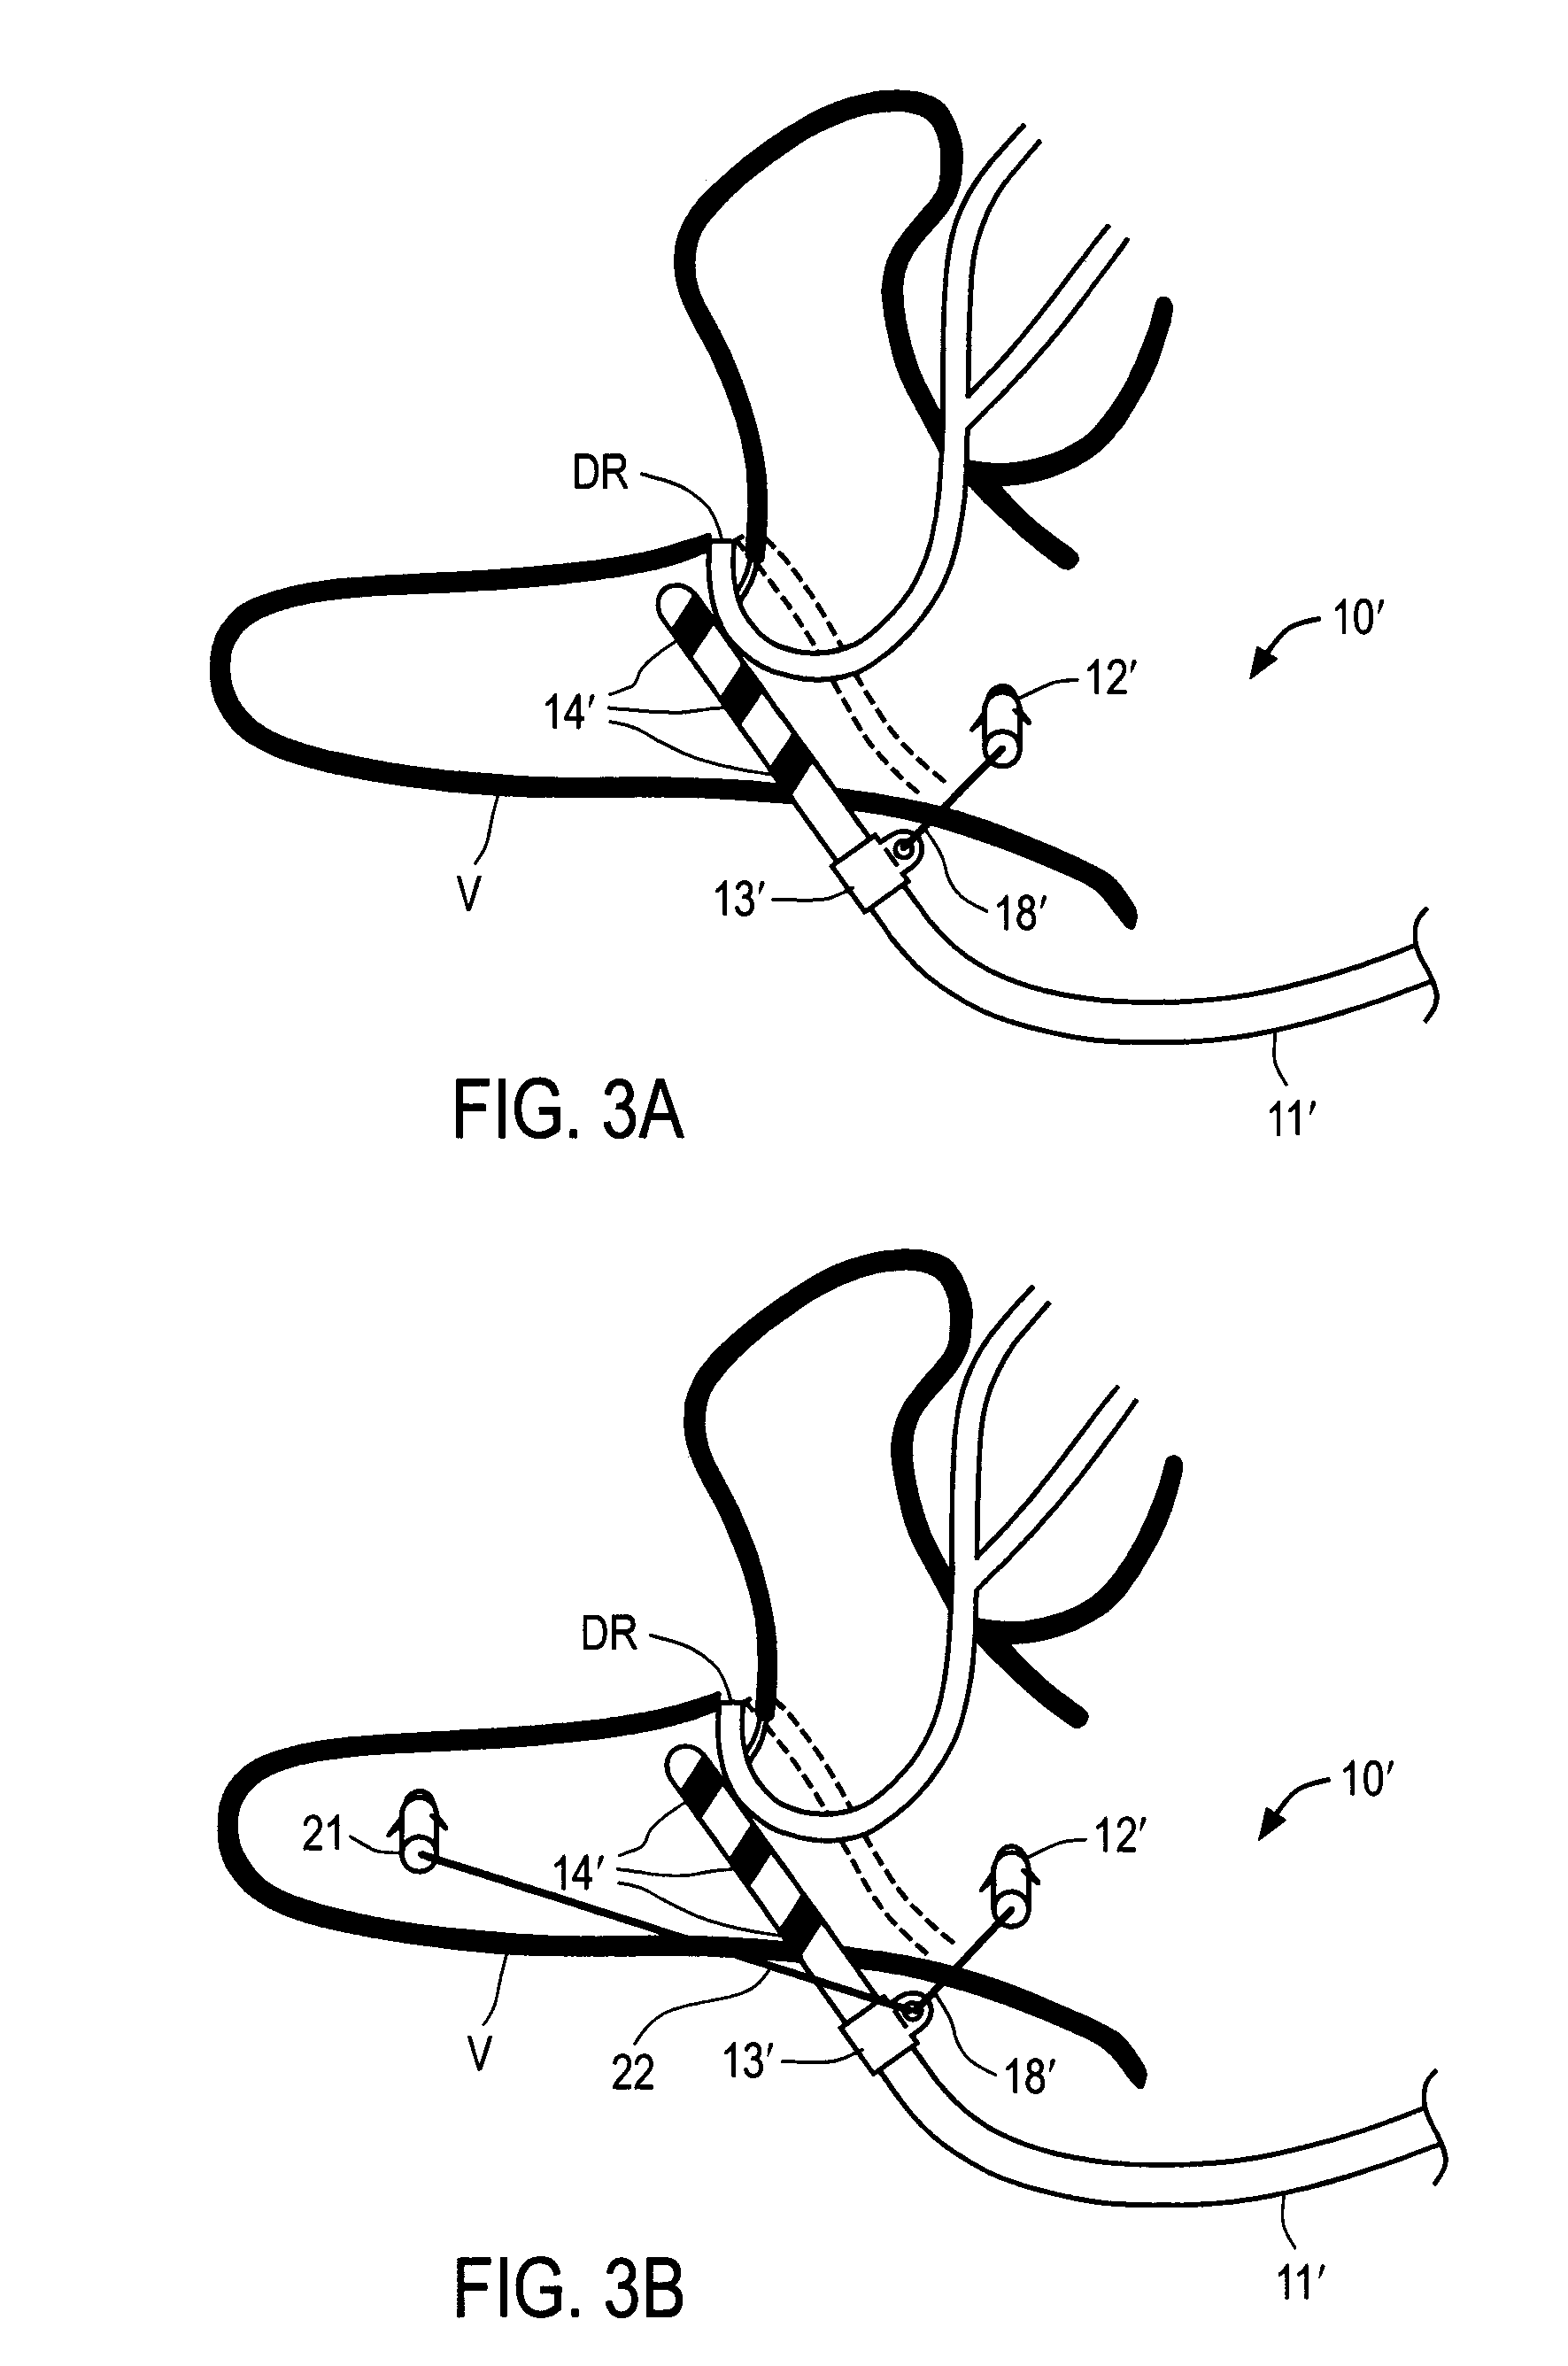 Apparatus and methods for anchoring electrode leads for use with implantable neuromuscular electrical stimulator